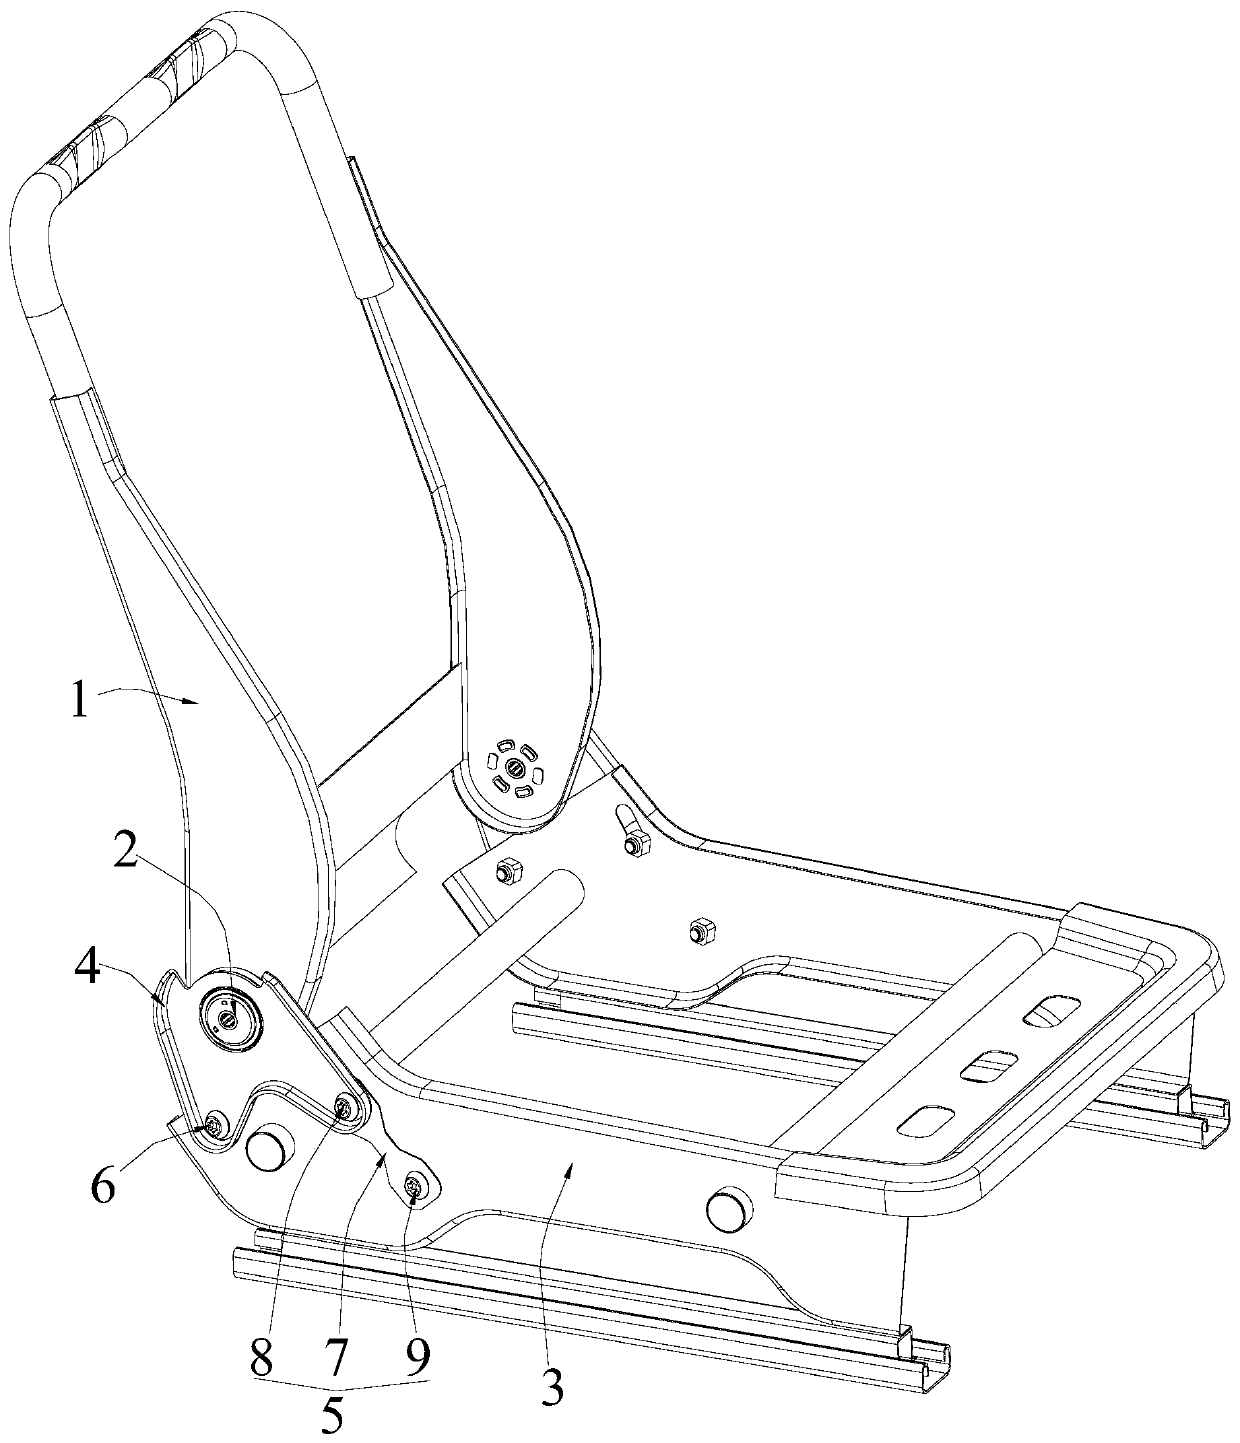 Stretching type rear-end collision seat energy absorption structure